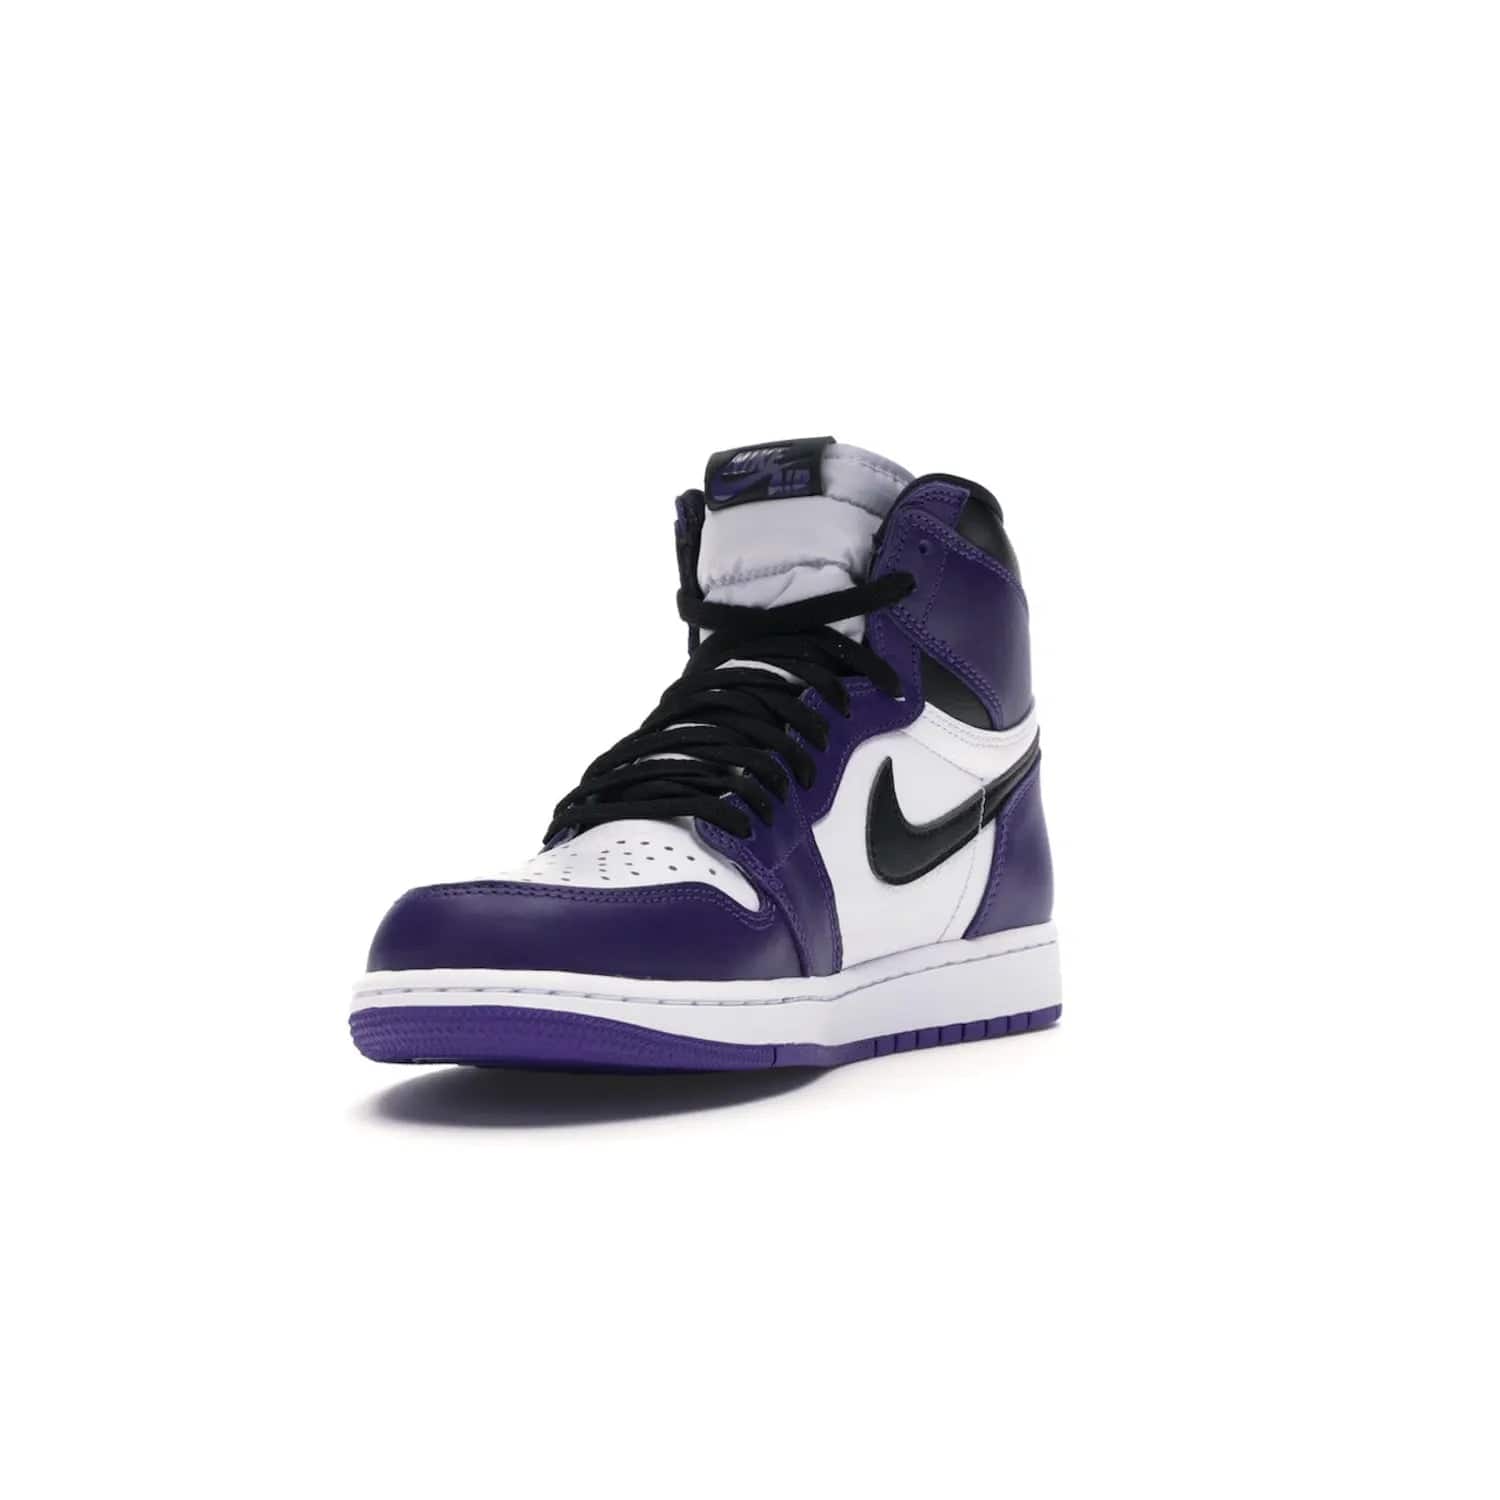 Jordan 1 Retro High Court Purple White - Image 13 - Only at www.BallersClubKickz.com - Grab the classic Jordan 1 Retro High Court Purple White and add major flavor to your collection. White leather upper with Court Purple overlays and Swoosh logo. White midsole and purple outsole. Get yours and rep your Jordan Brand.